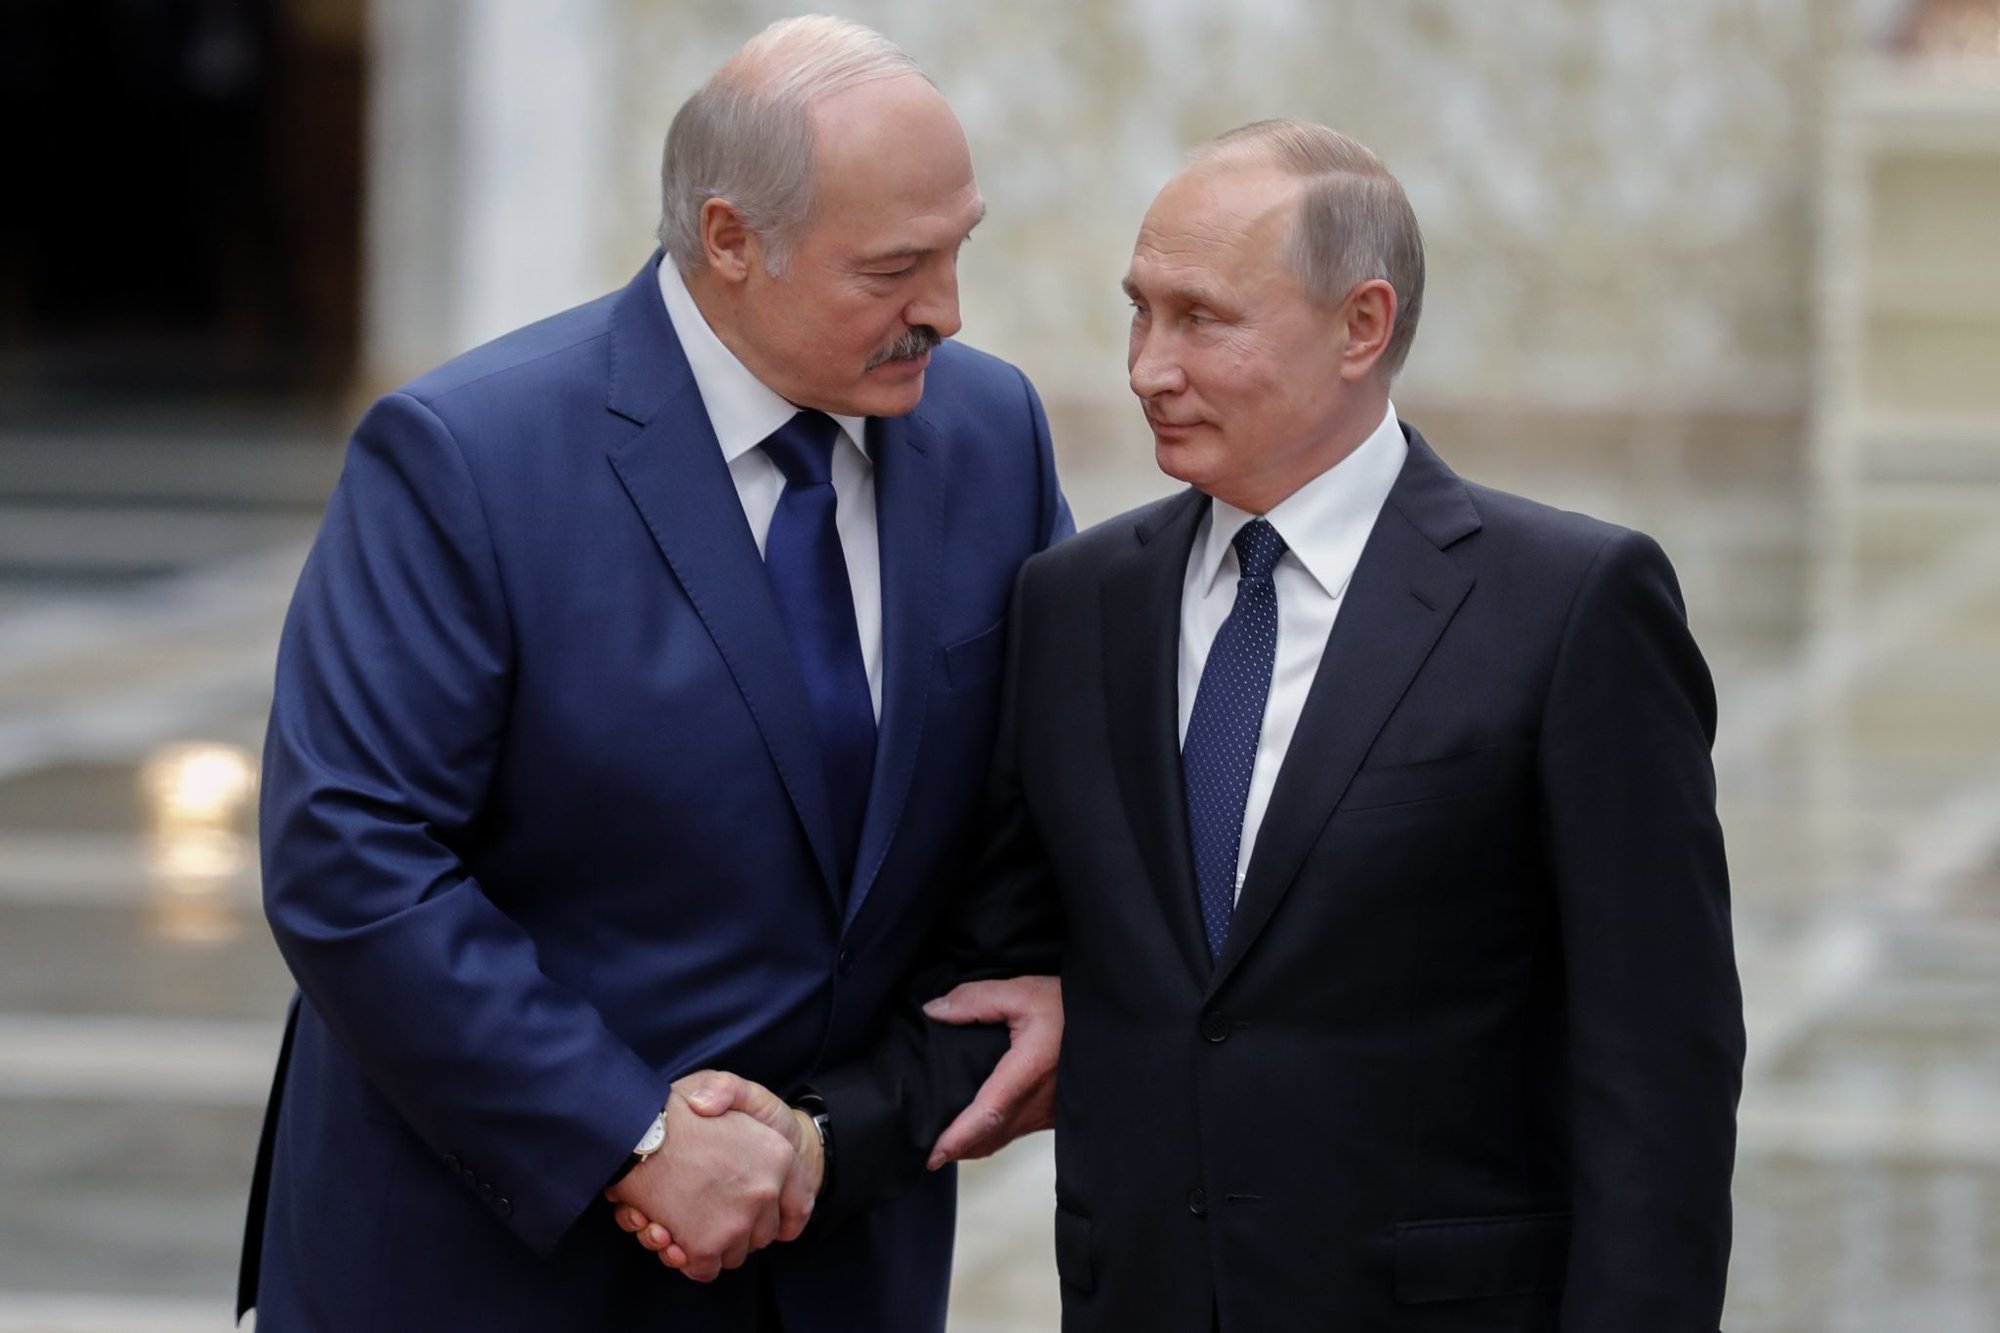 Belarus’ President Alexander Lukashenko (left) welcomes his Russian counterpart Vladimir Putin prior to the Collective Security Treaty Organisation summit in Minsk on Nov. 30, 2017.      MIKHAIL METZEL/AFP via Getty Images